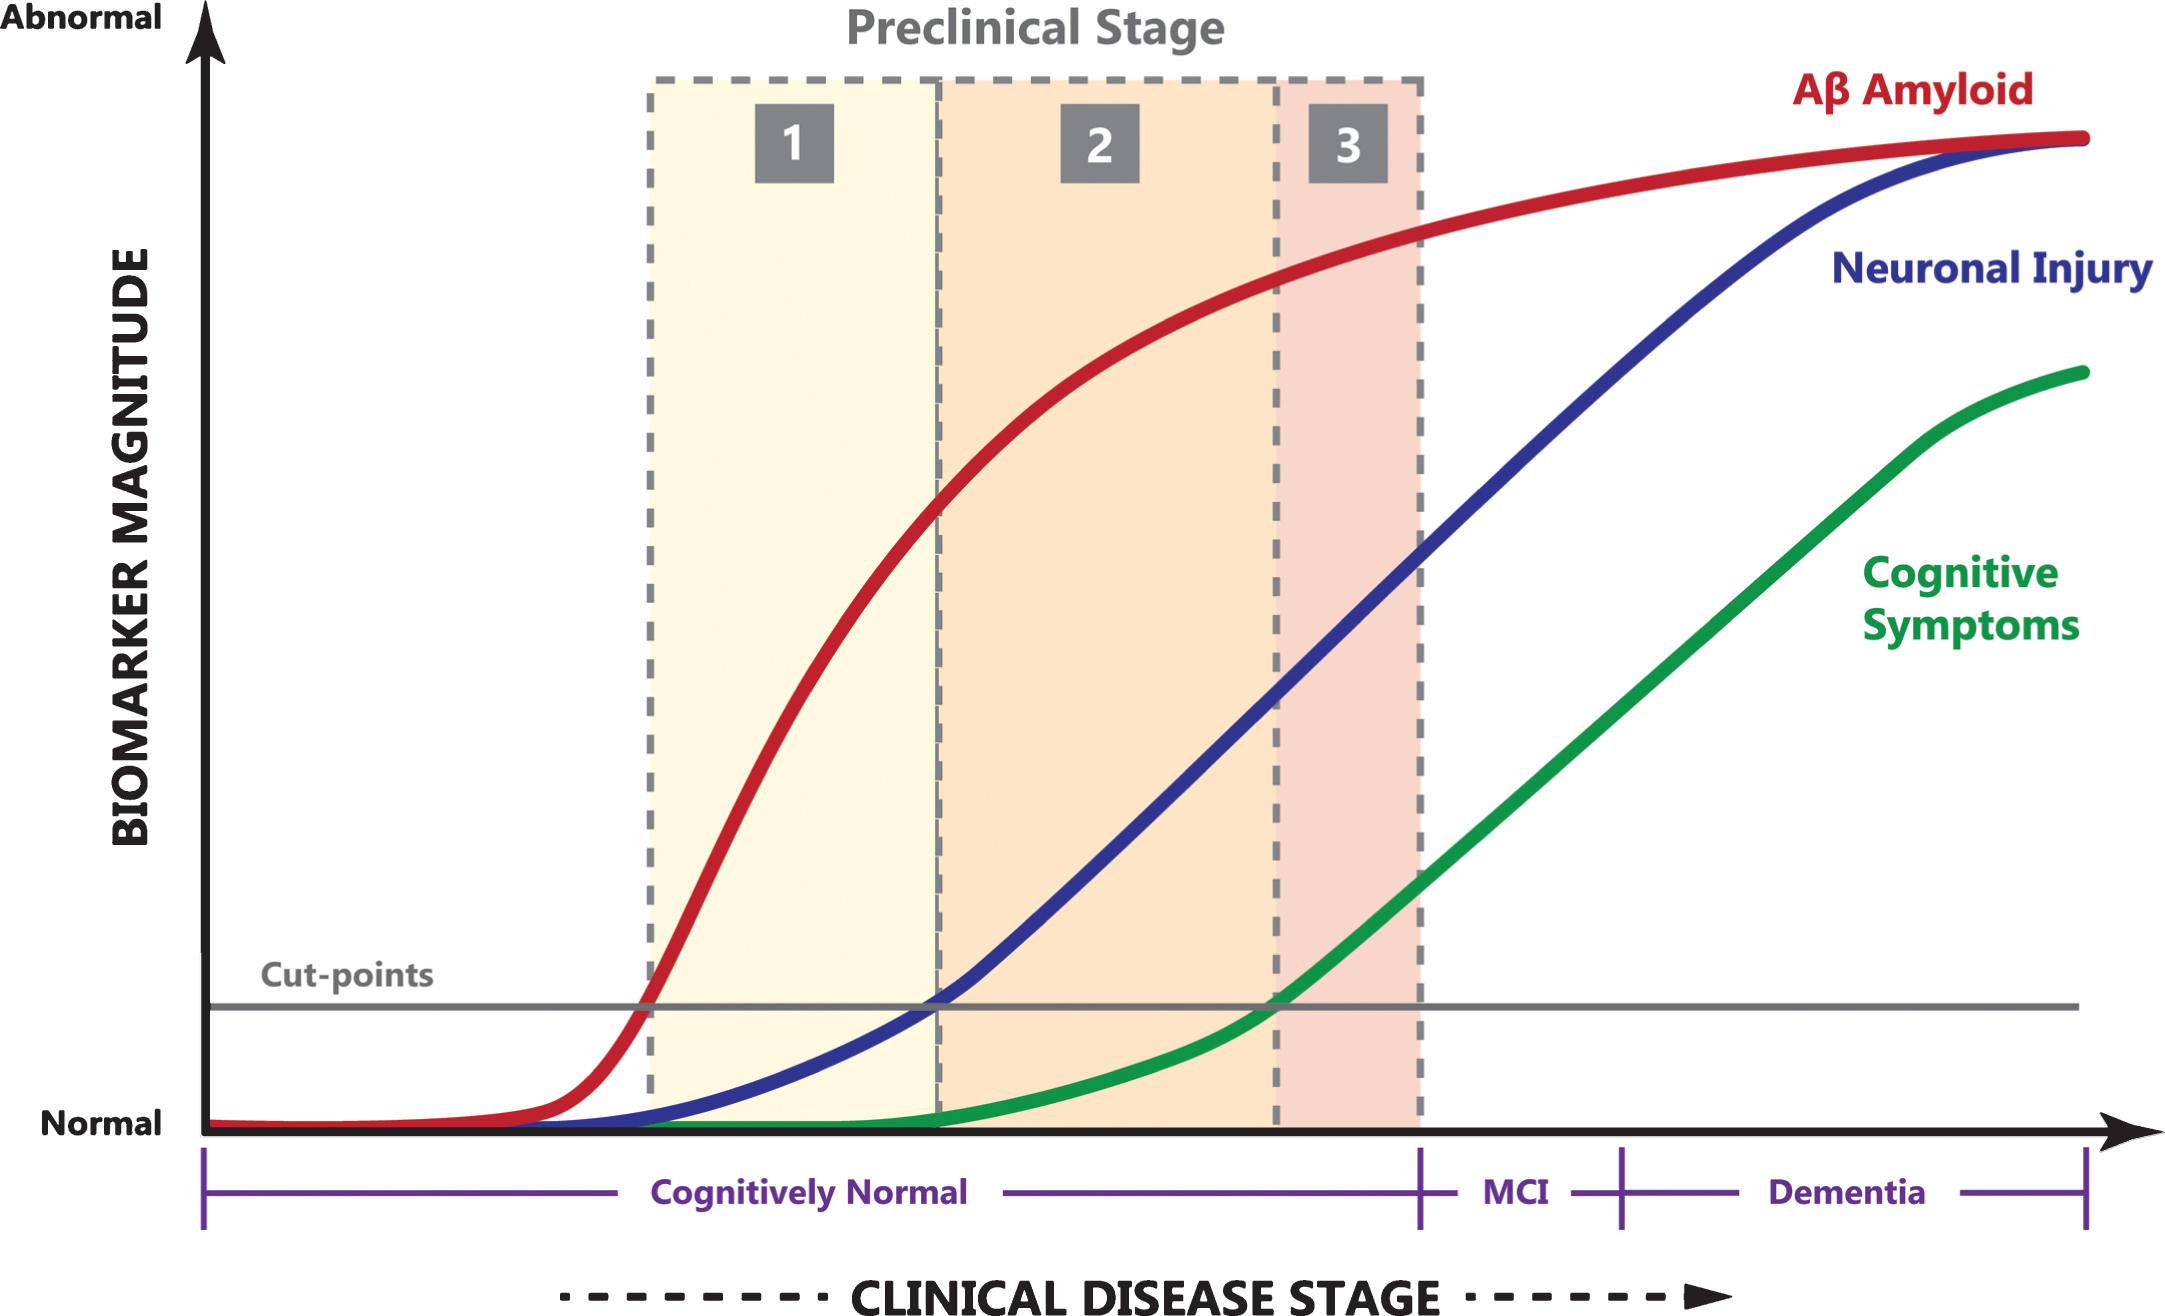 The relationship of clinical disease stage to biomarker magnitude (arbitrary units). Notice the long period of cognitively normal preclinical AD, quickly progressing though MCI to AD dementia. Image adapted with permission from [15].